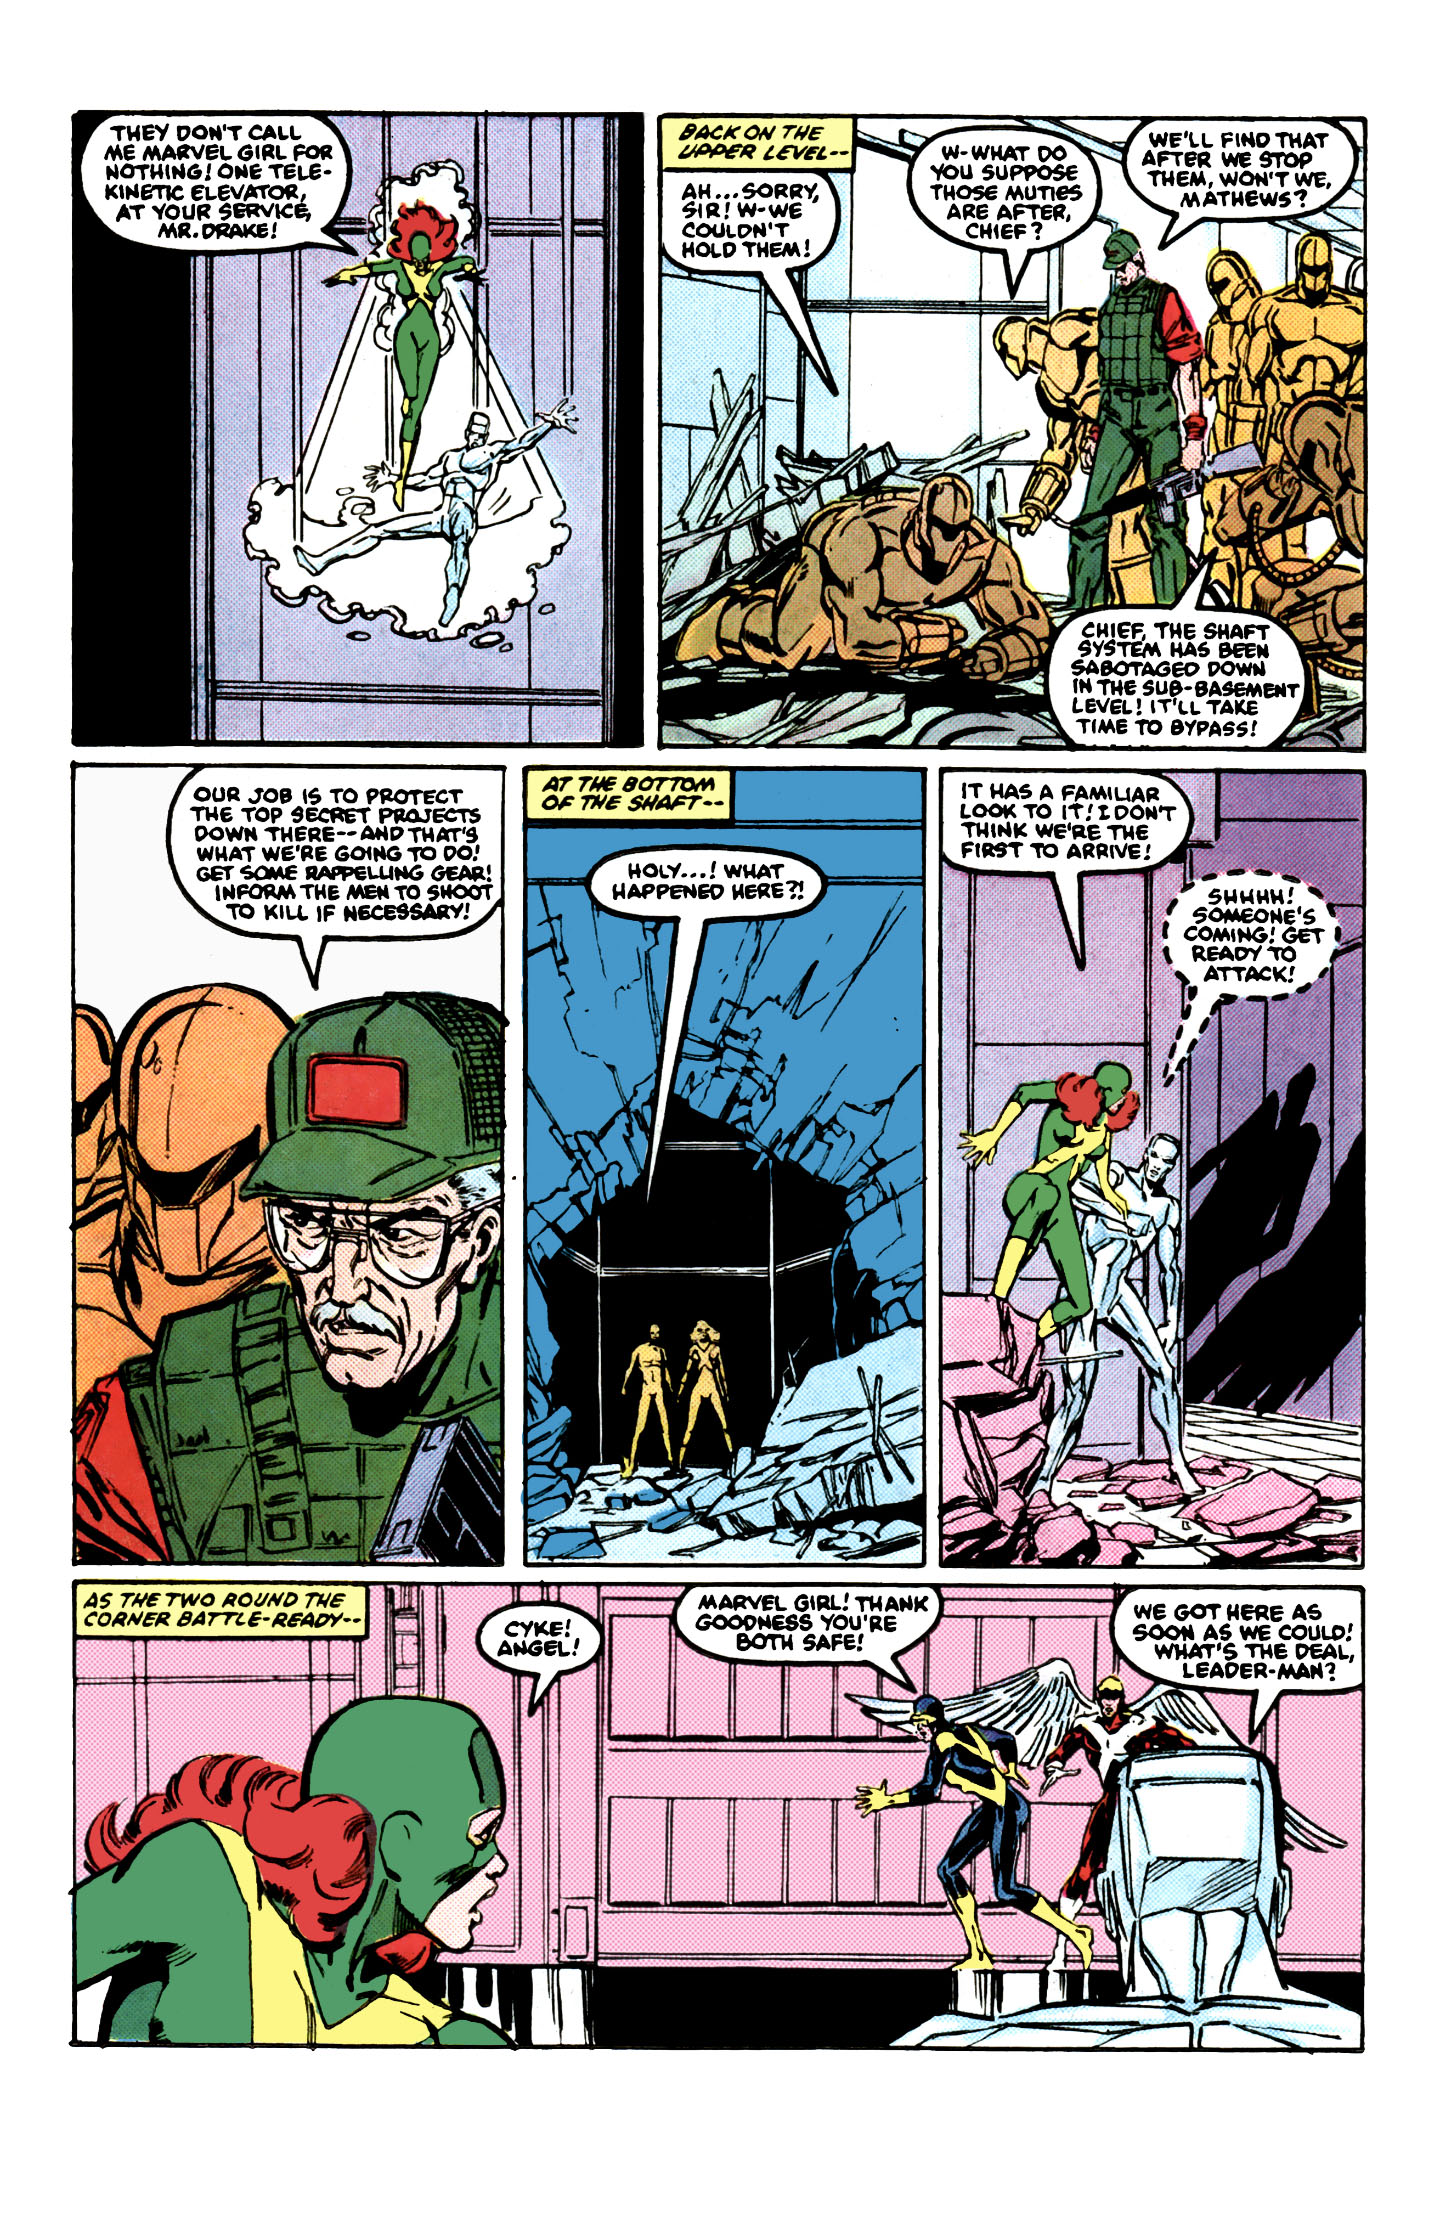 X-Factor (1986) 3 Page 16